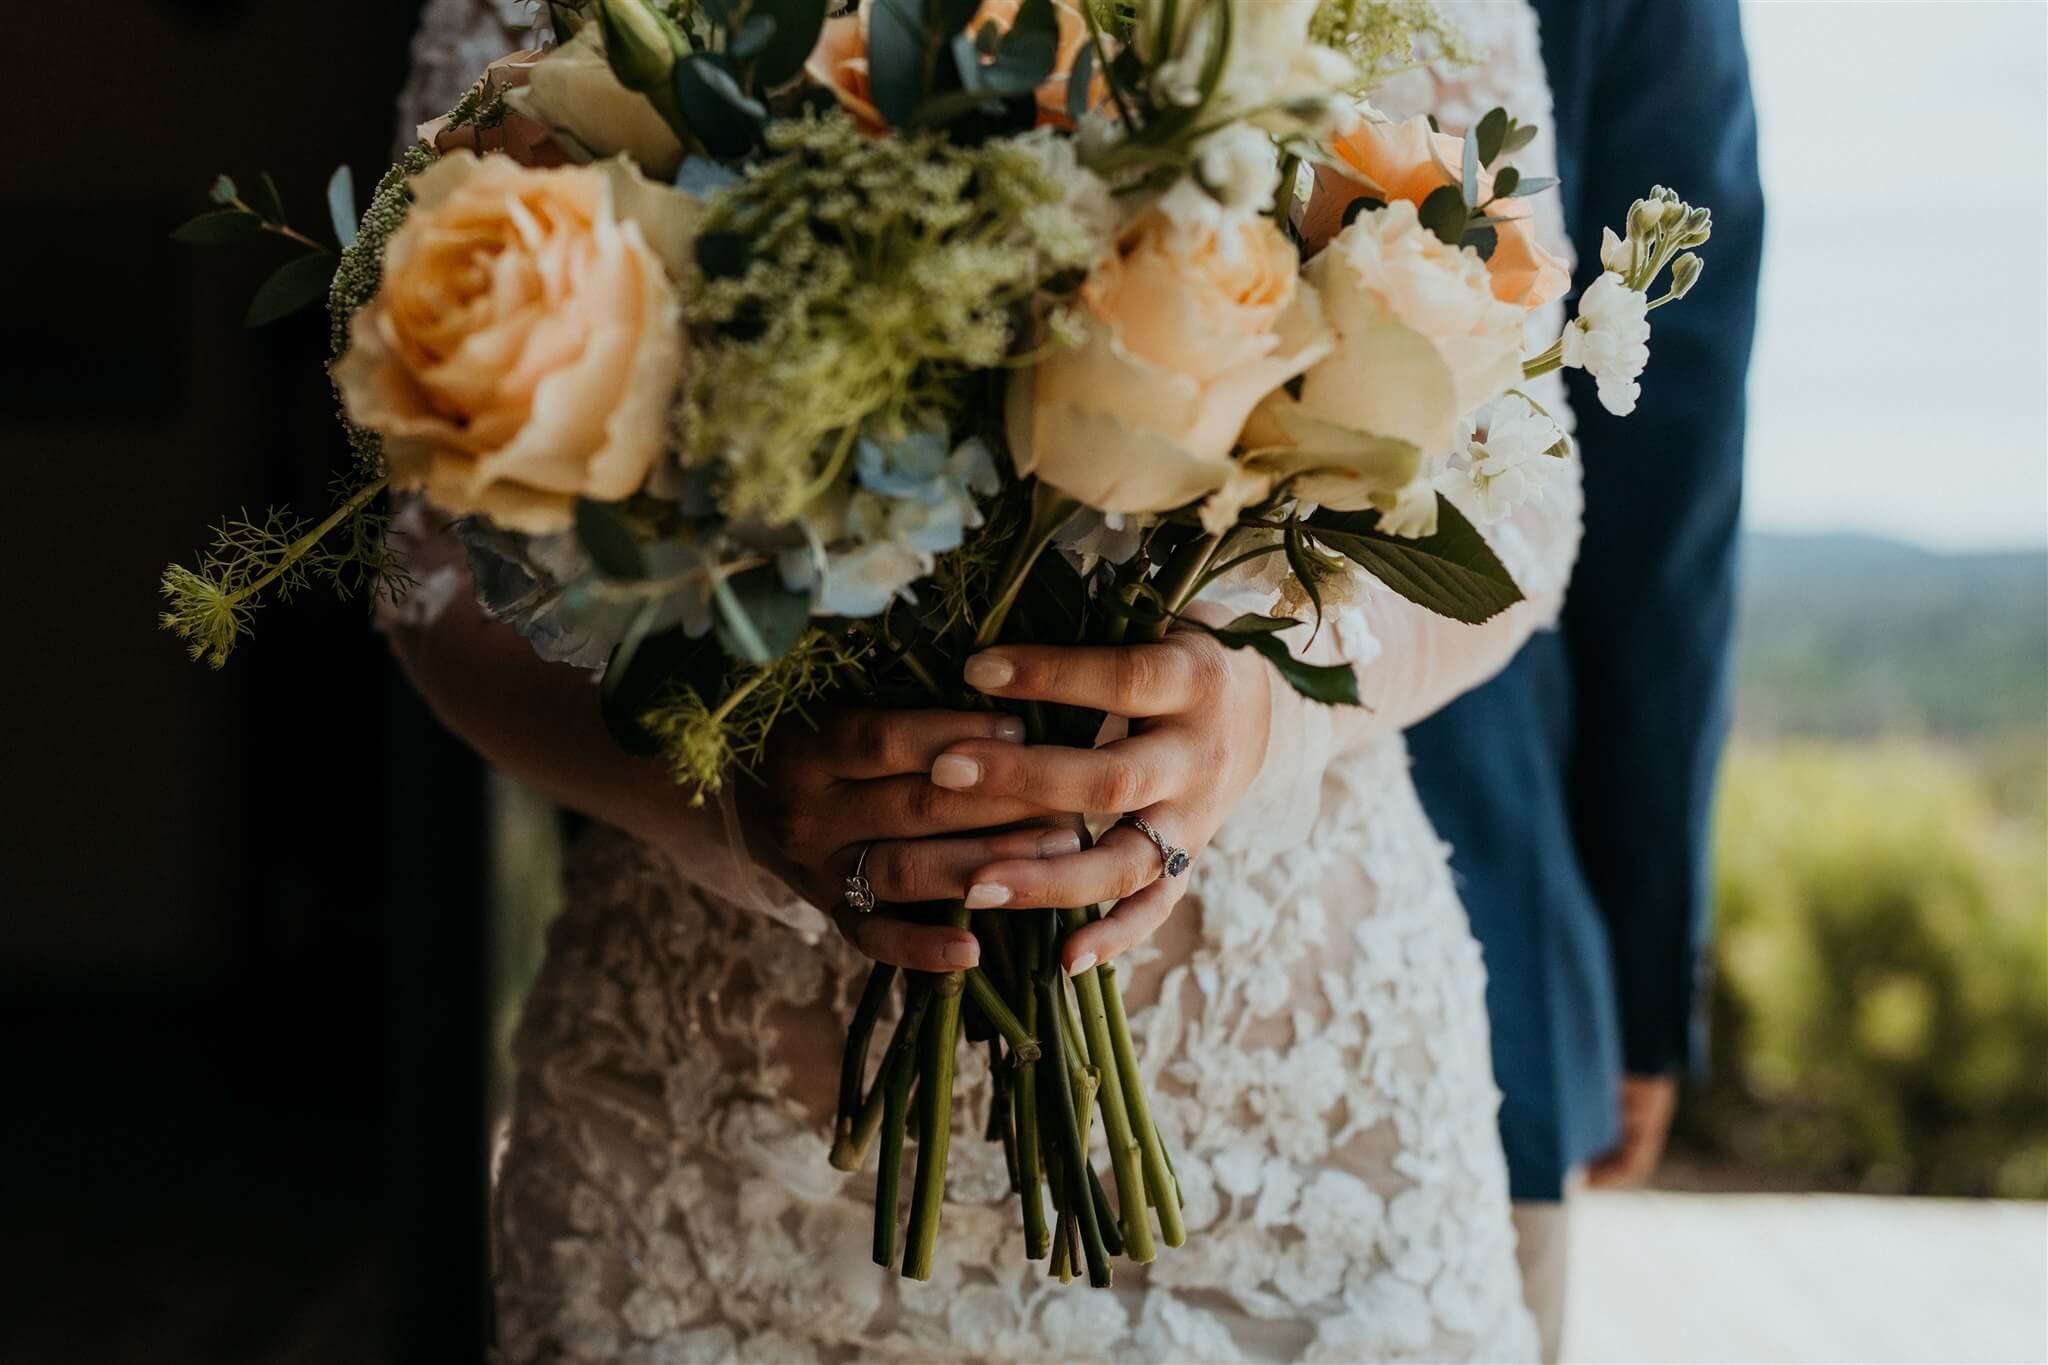 Bride holding peach, green, white, and blue floral arrangement